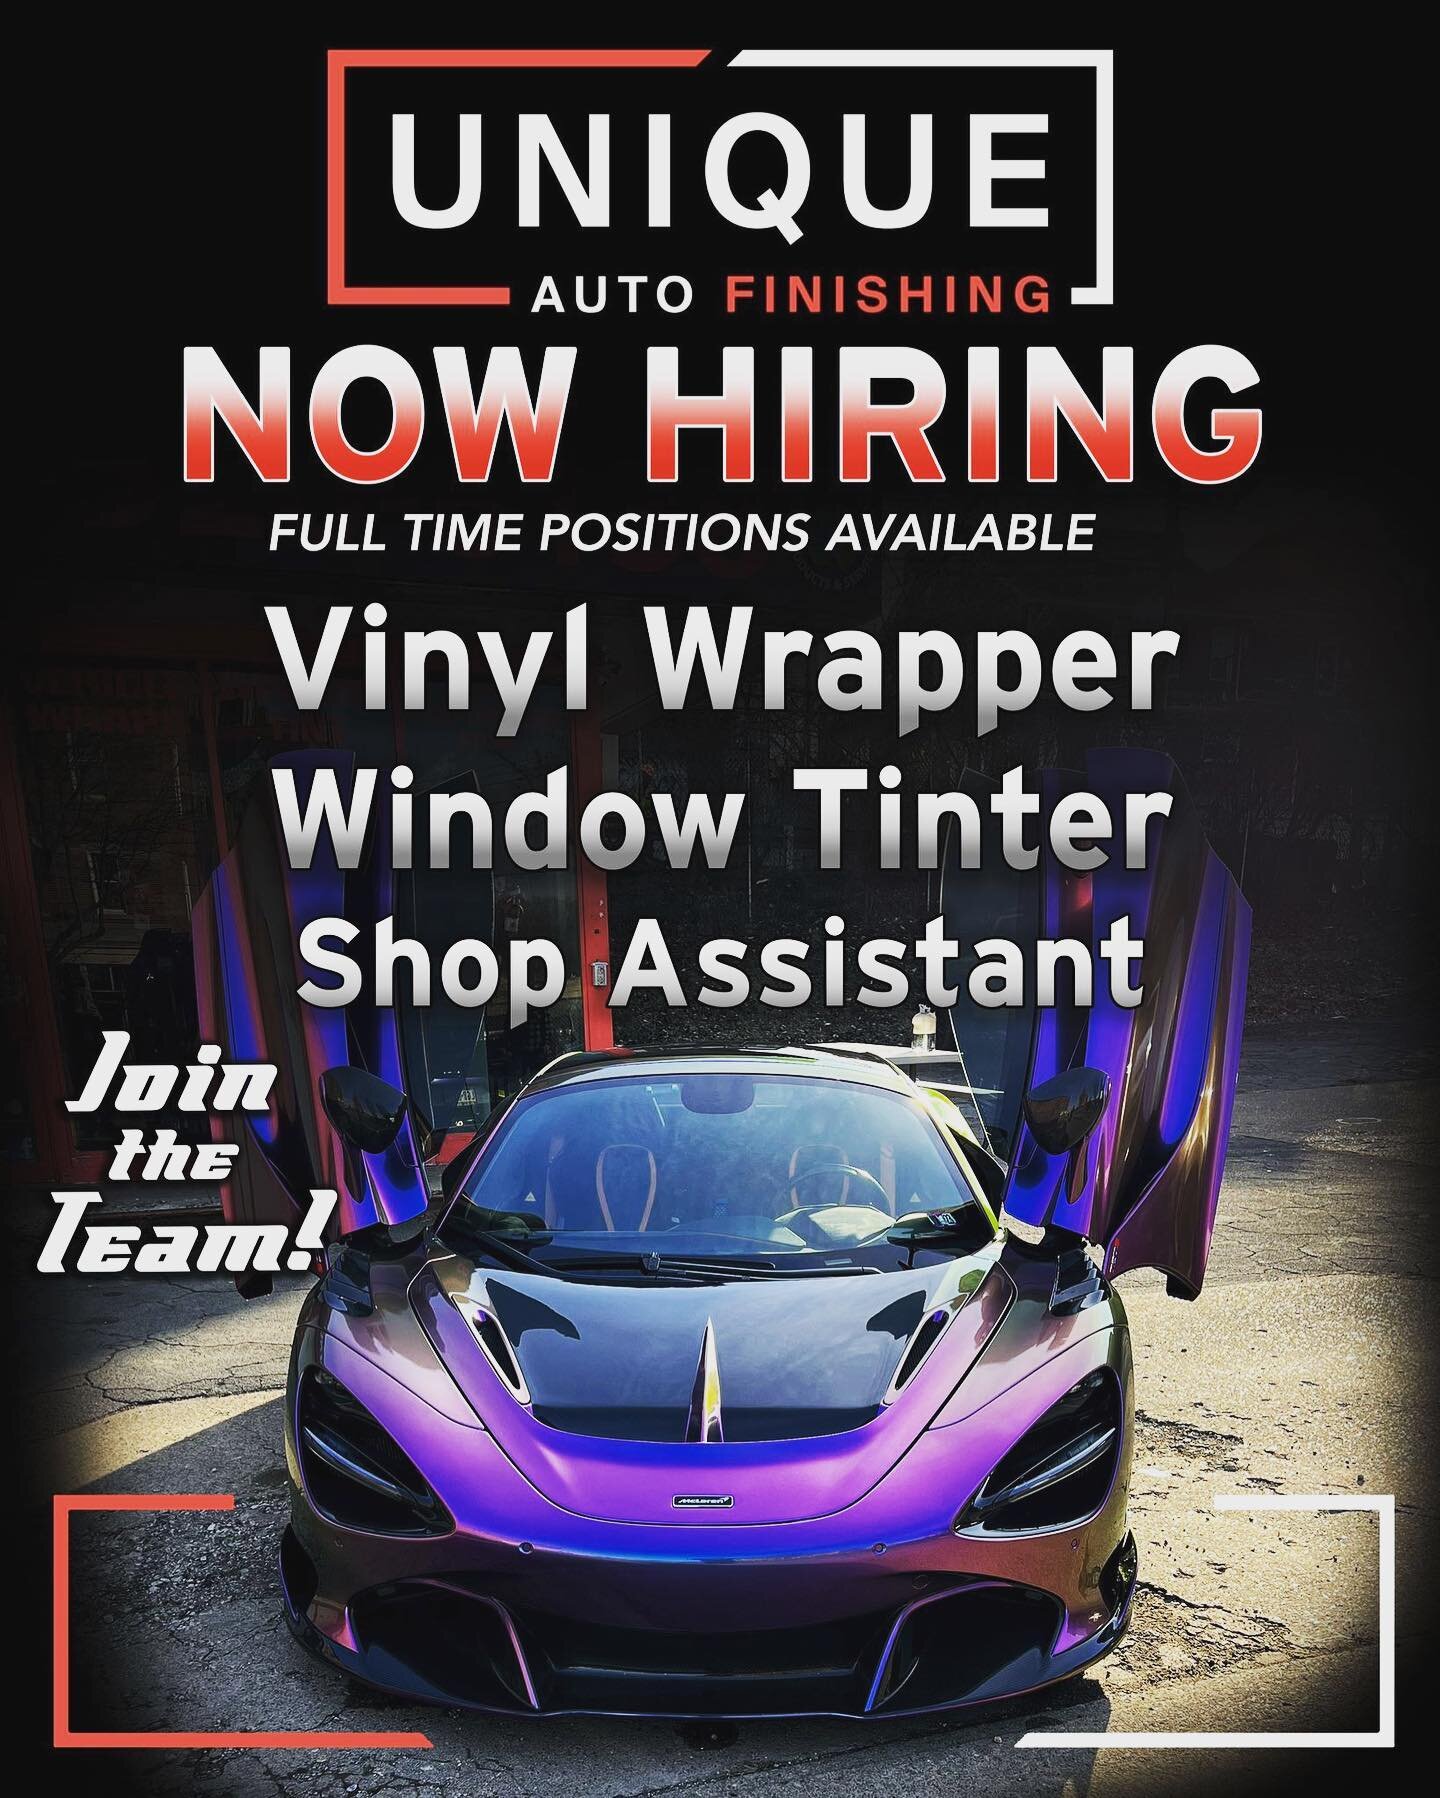 Looking for experienced wrappers/window Tinter&rsquo;s also shop help. Training available for the right person.